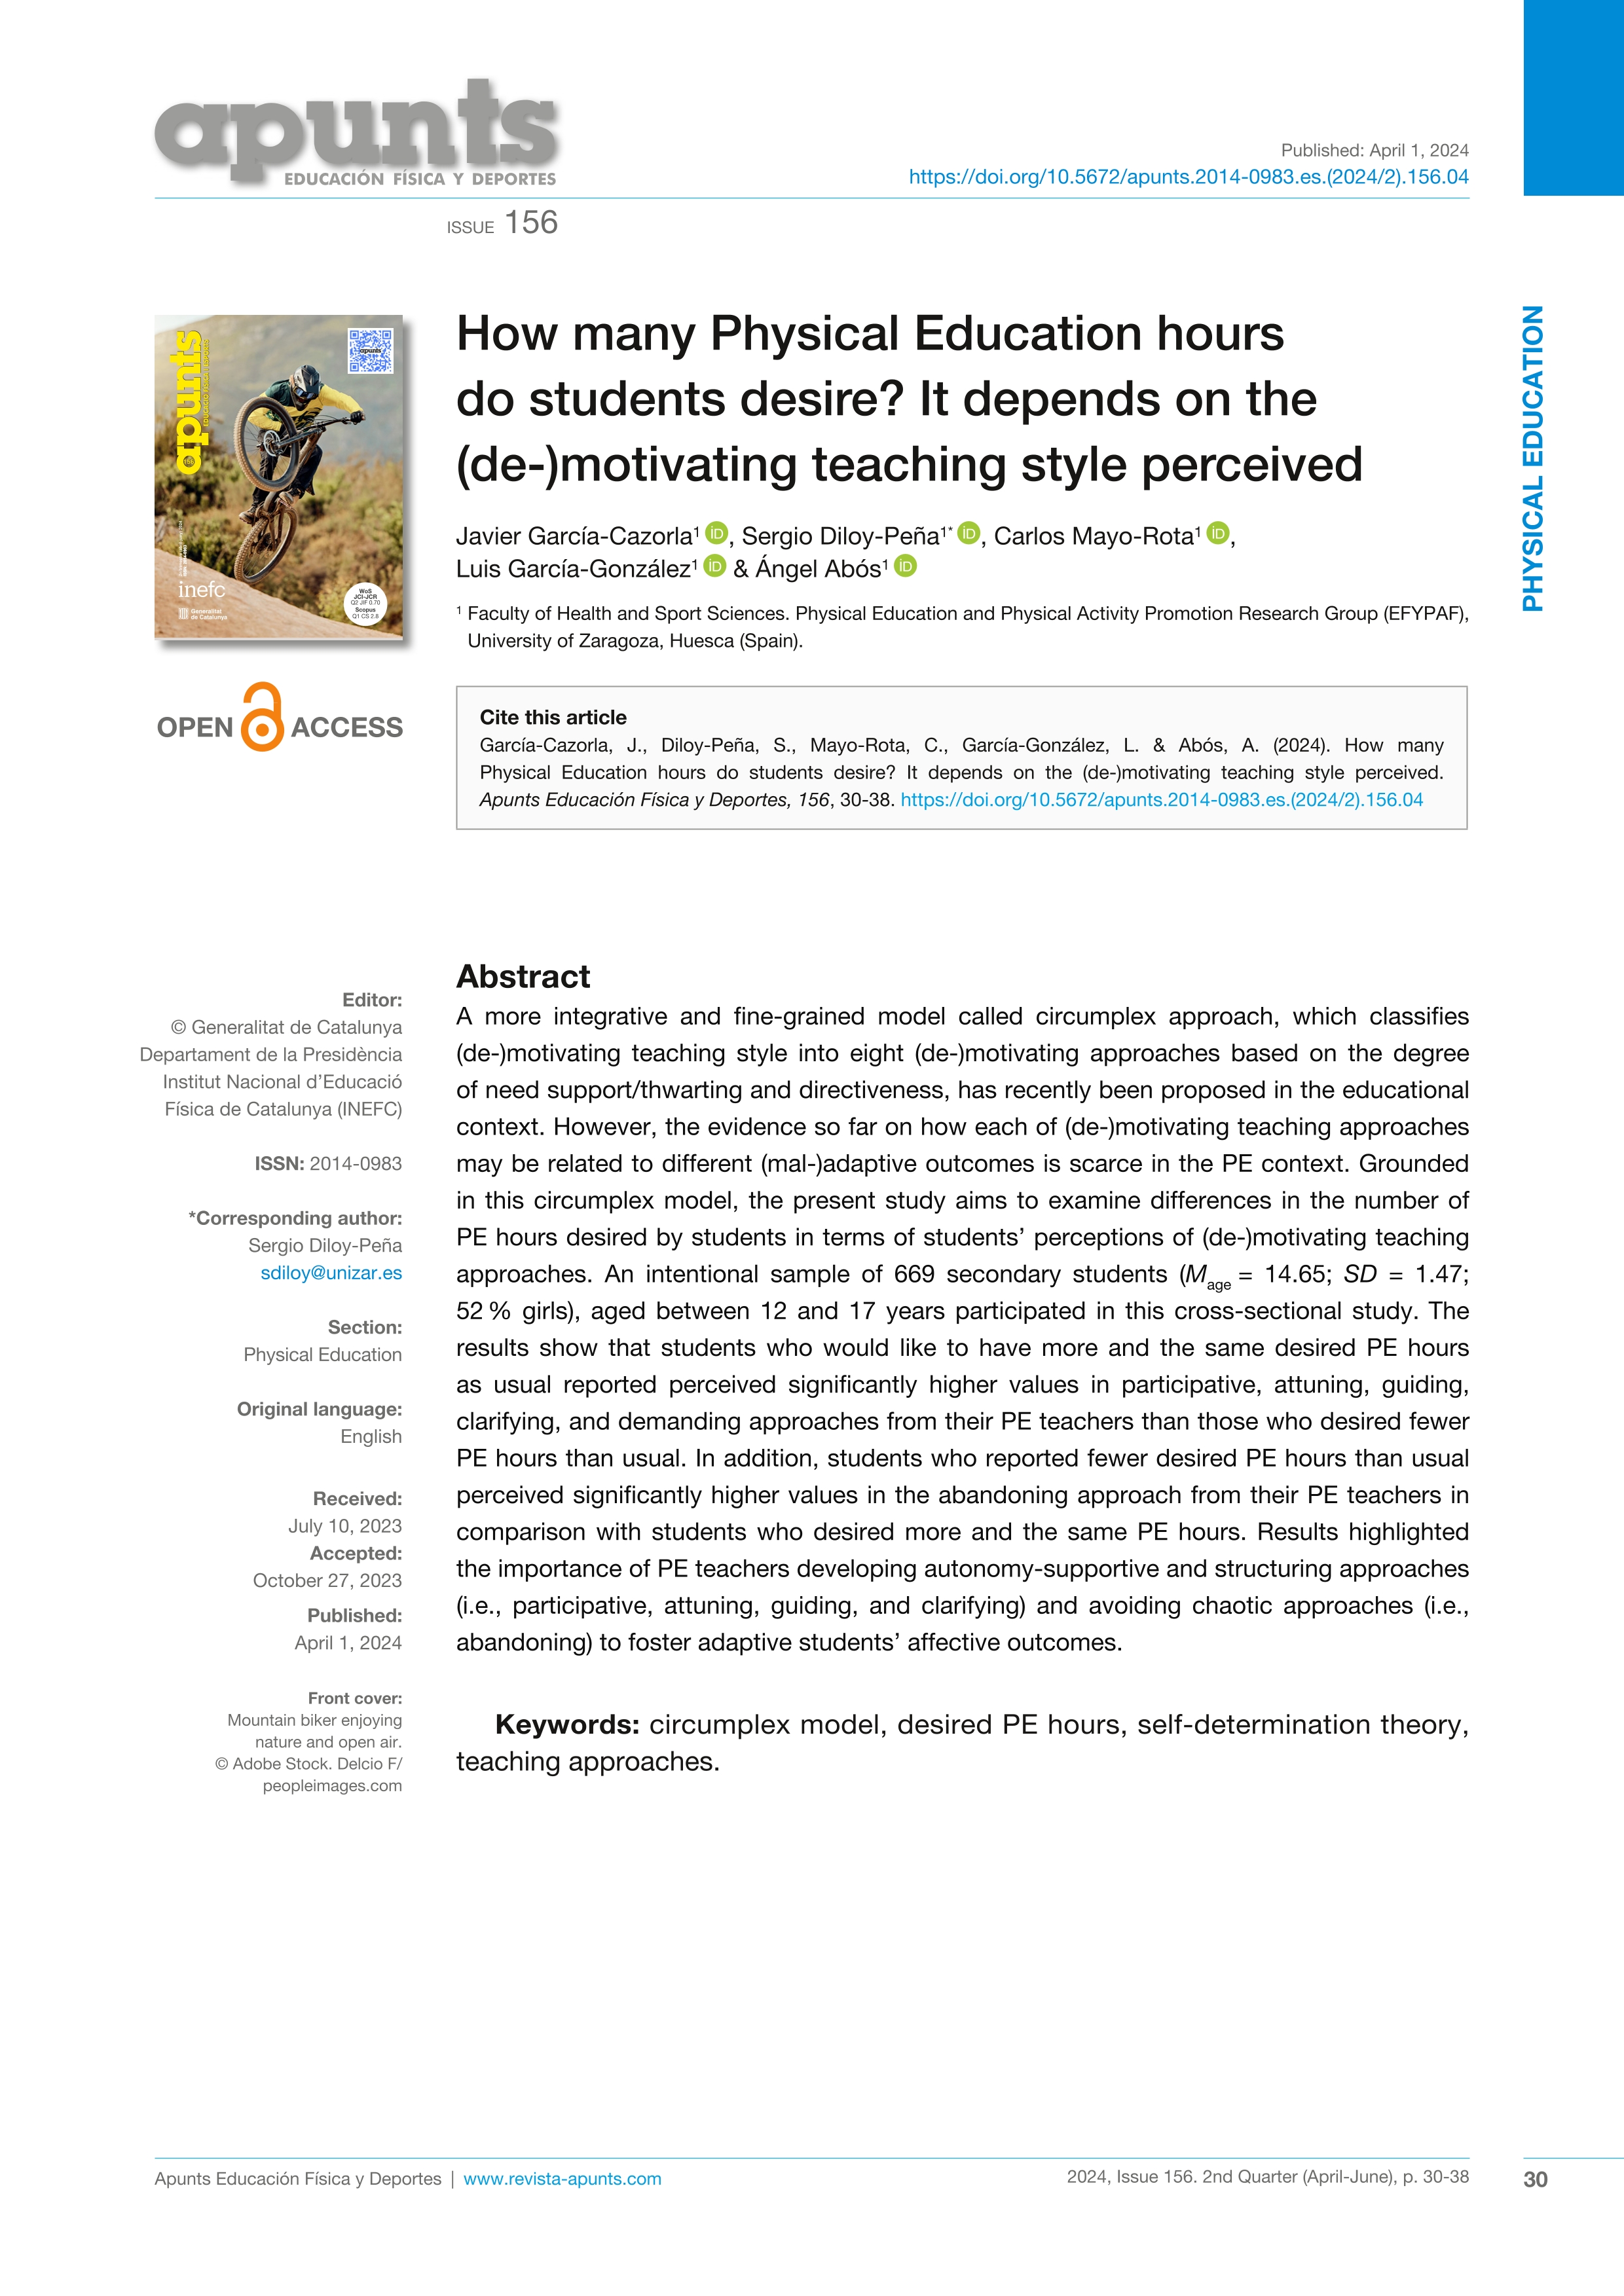 How many Physical Education hours do students desire? It depends on the (de-) motivating teaching style perceived